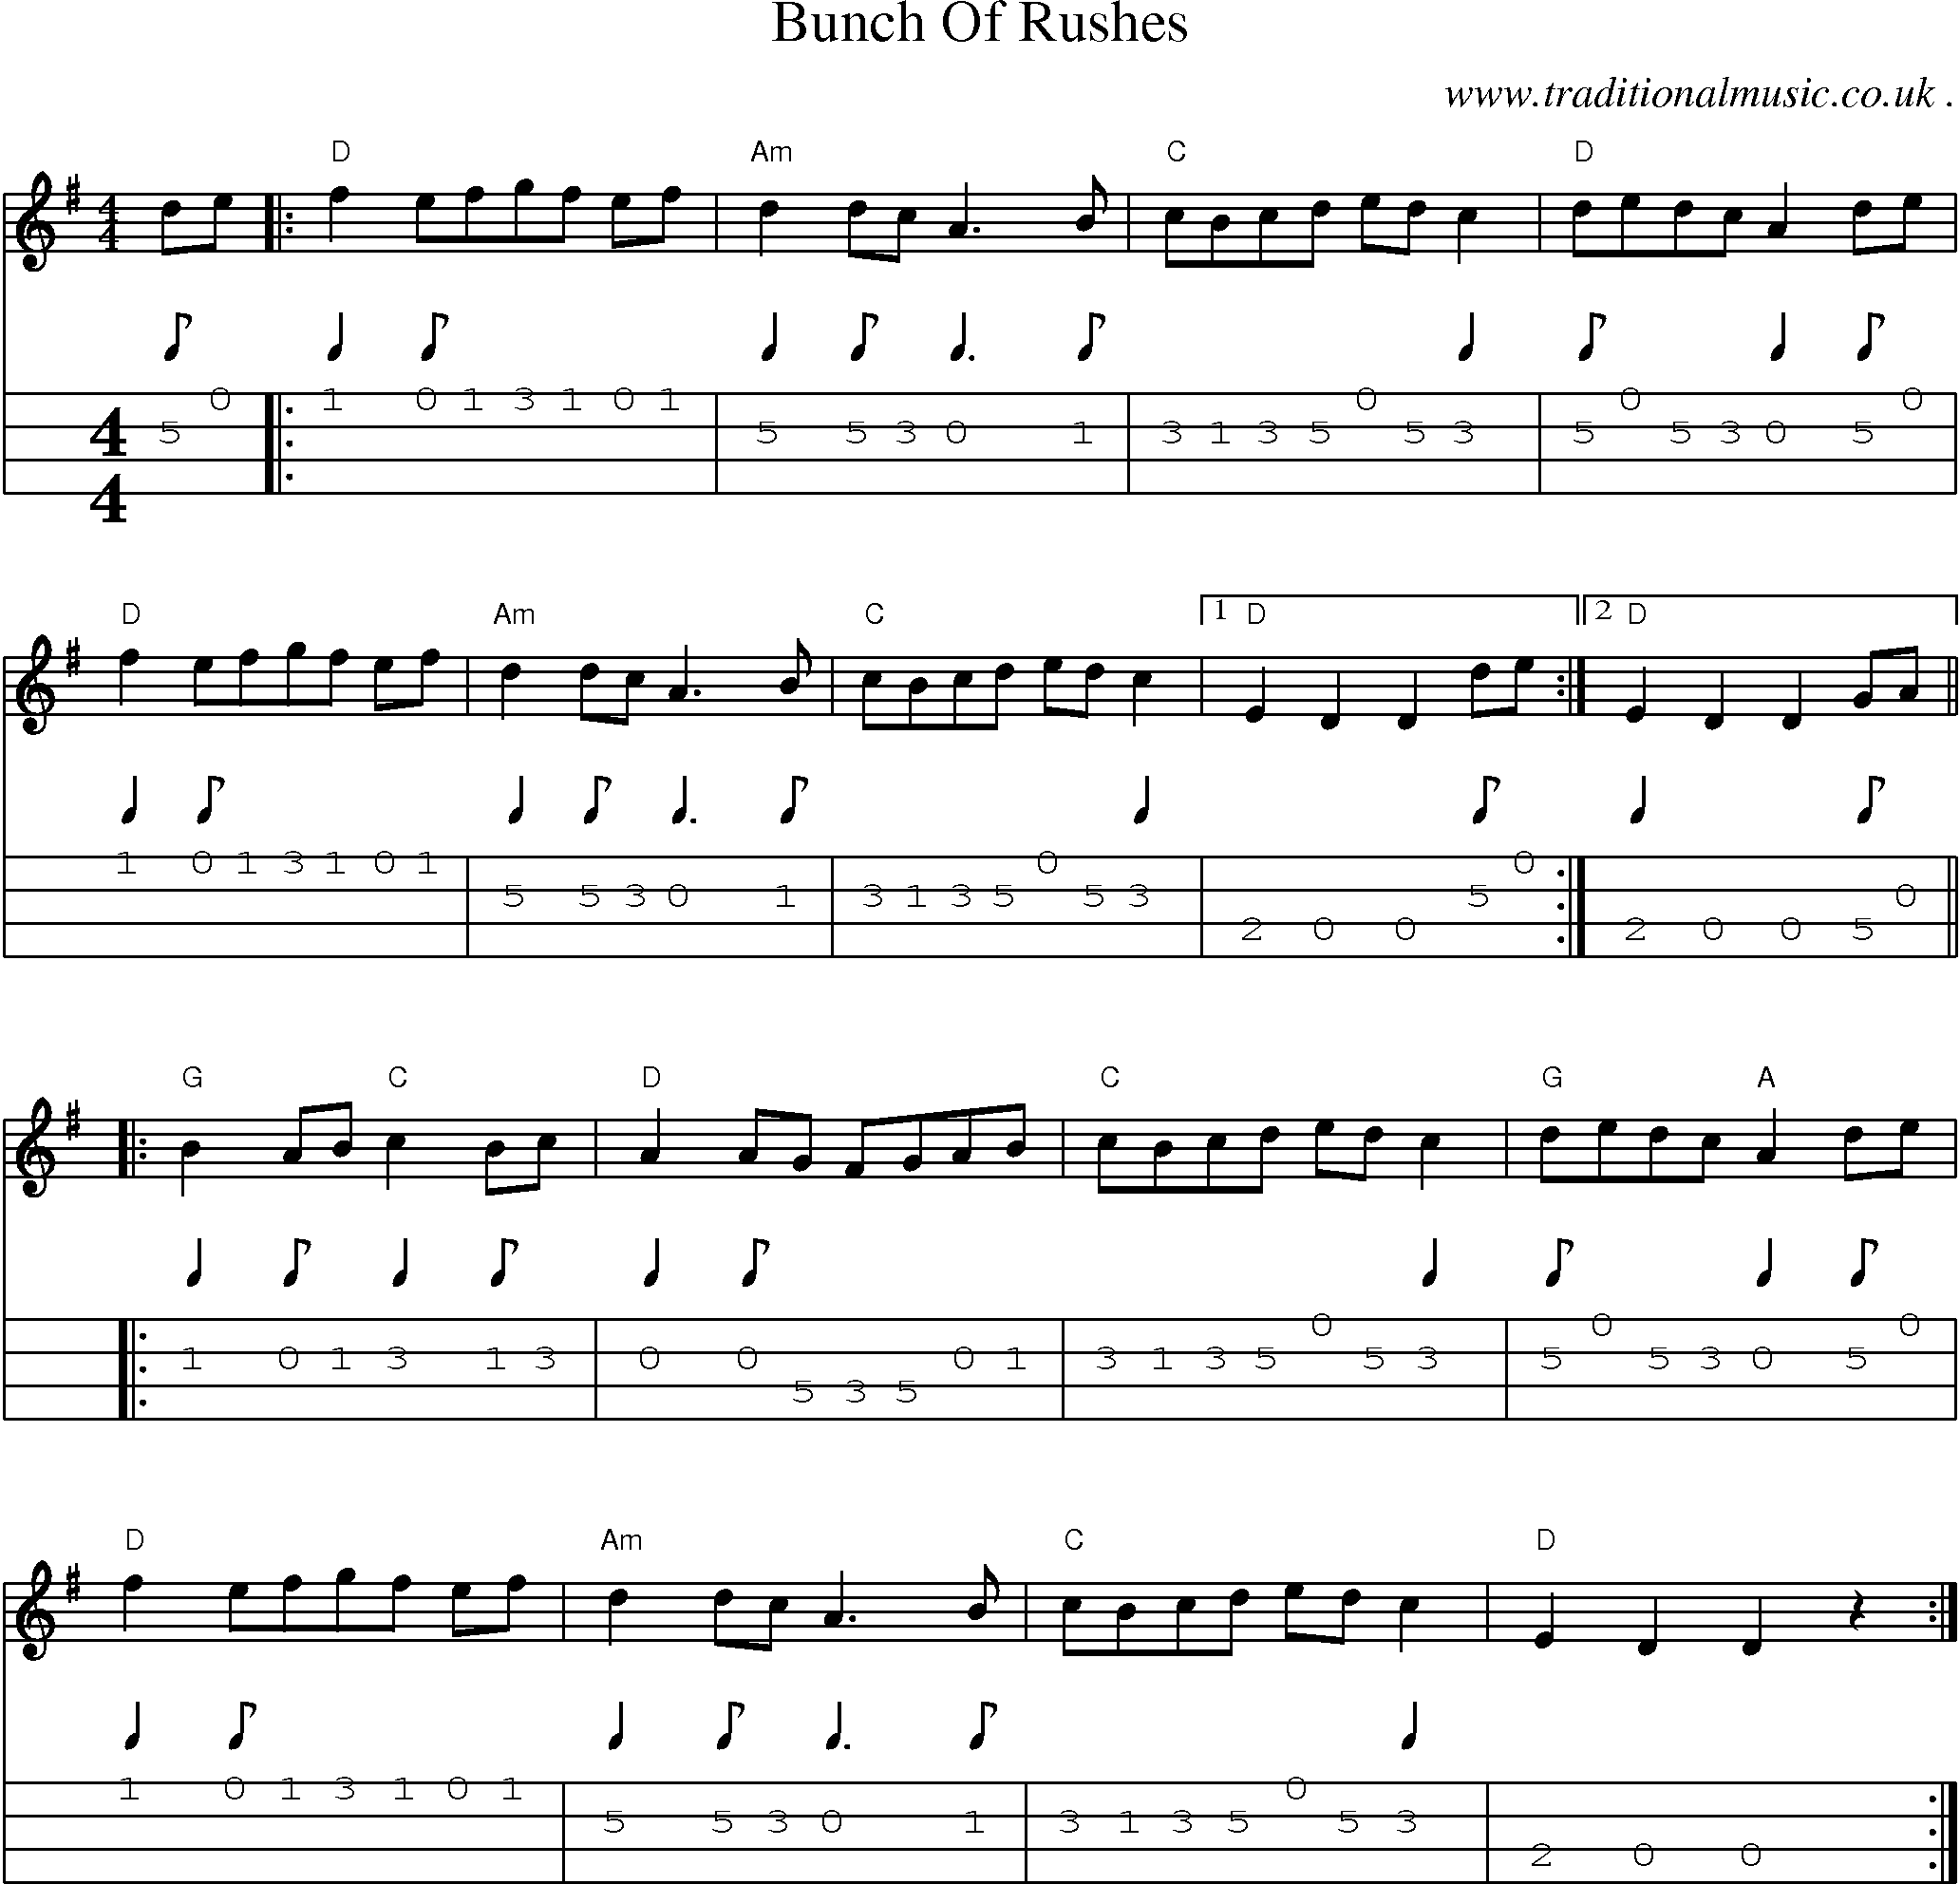 Music Score and Guitar Tabs for Bunch Of Rushes